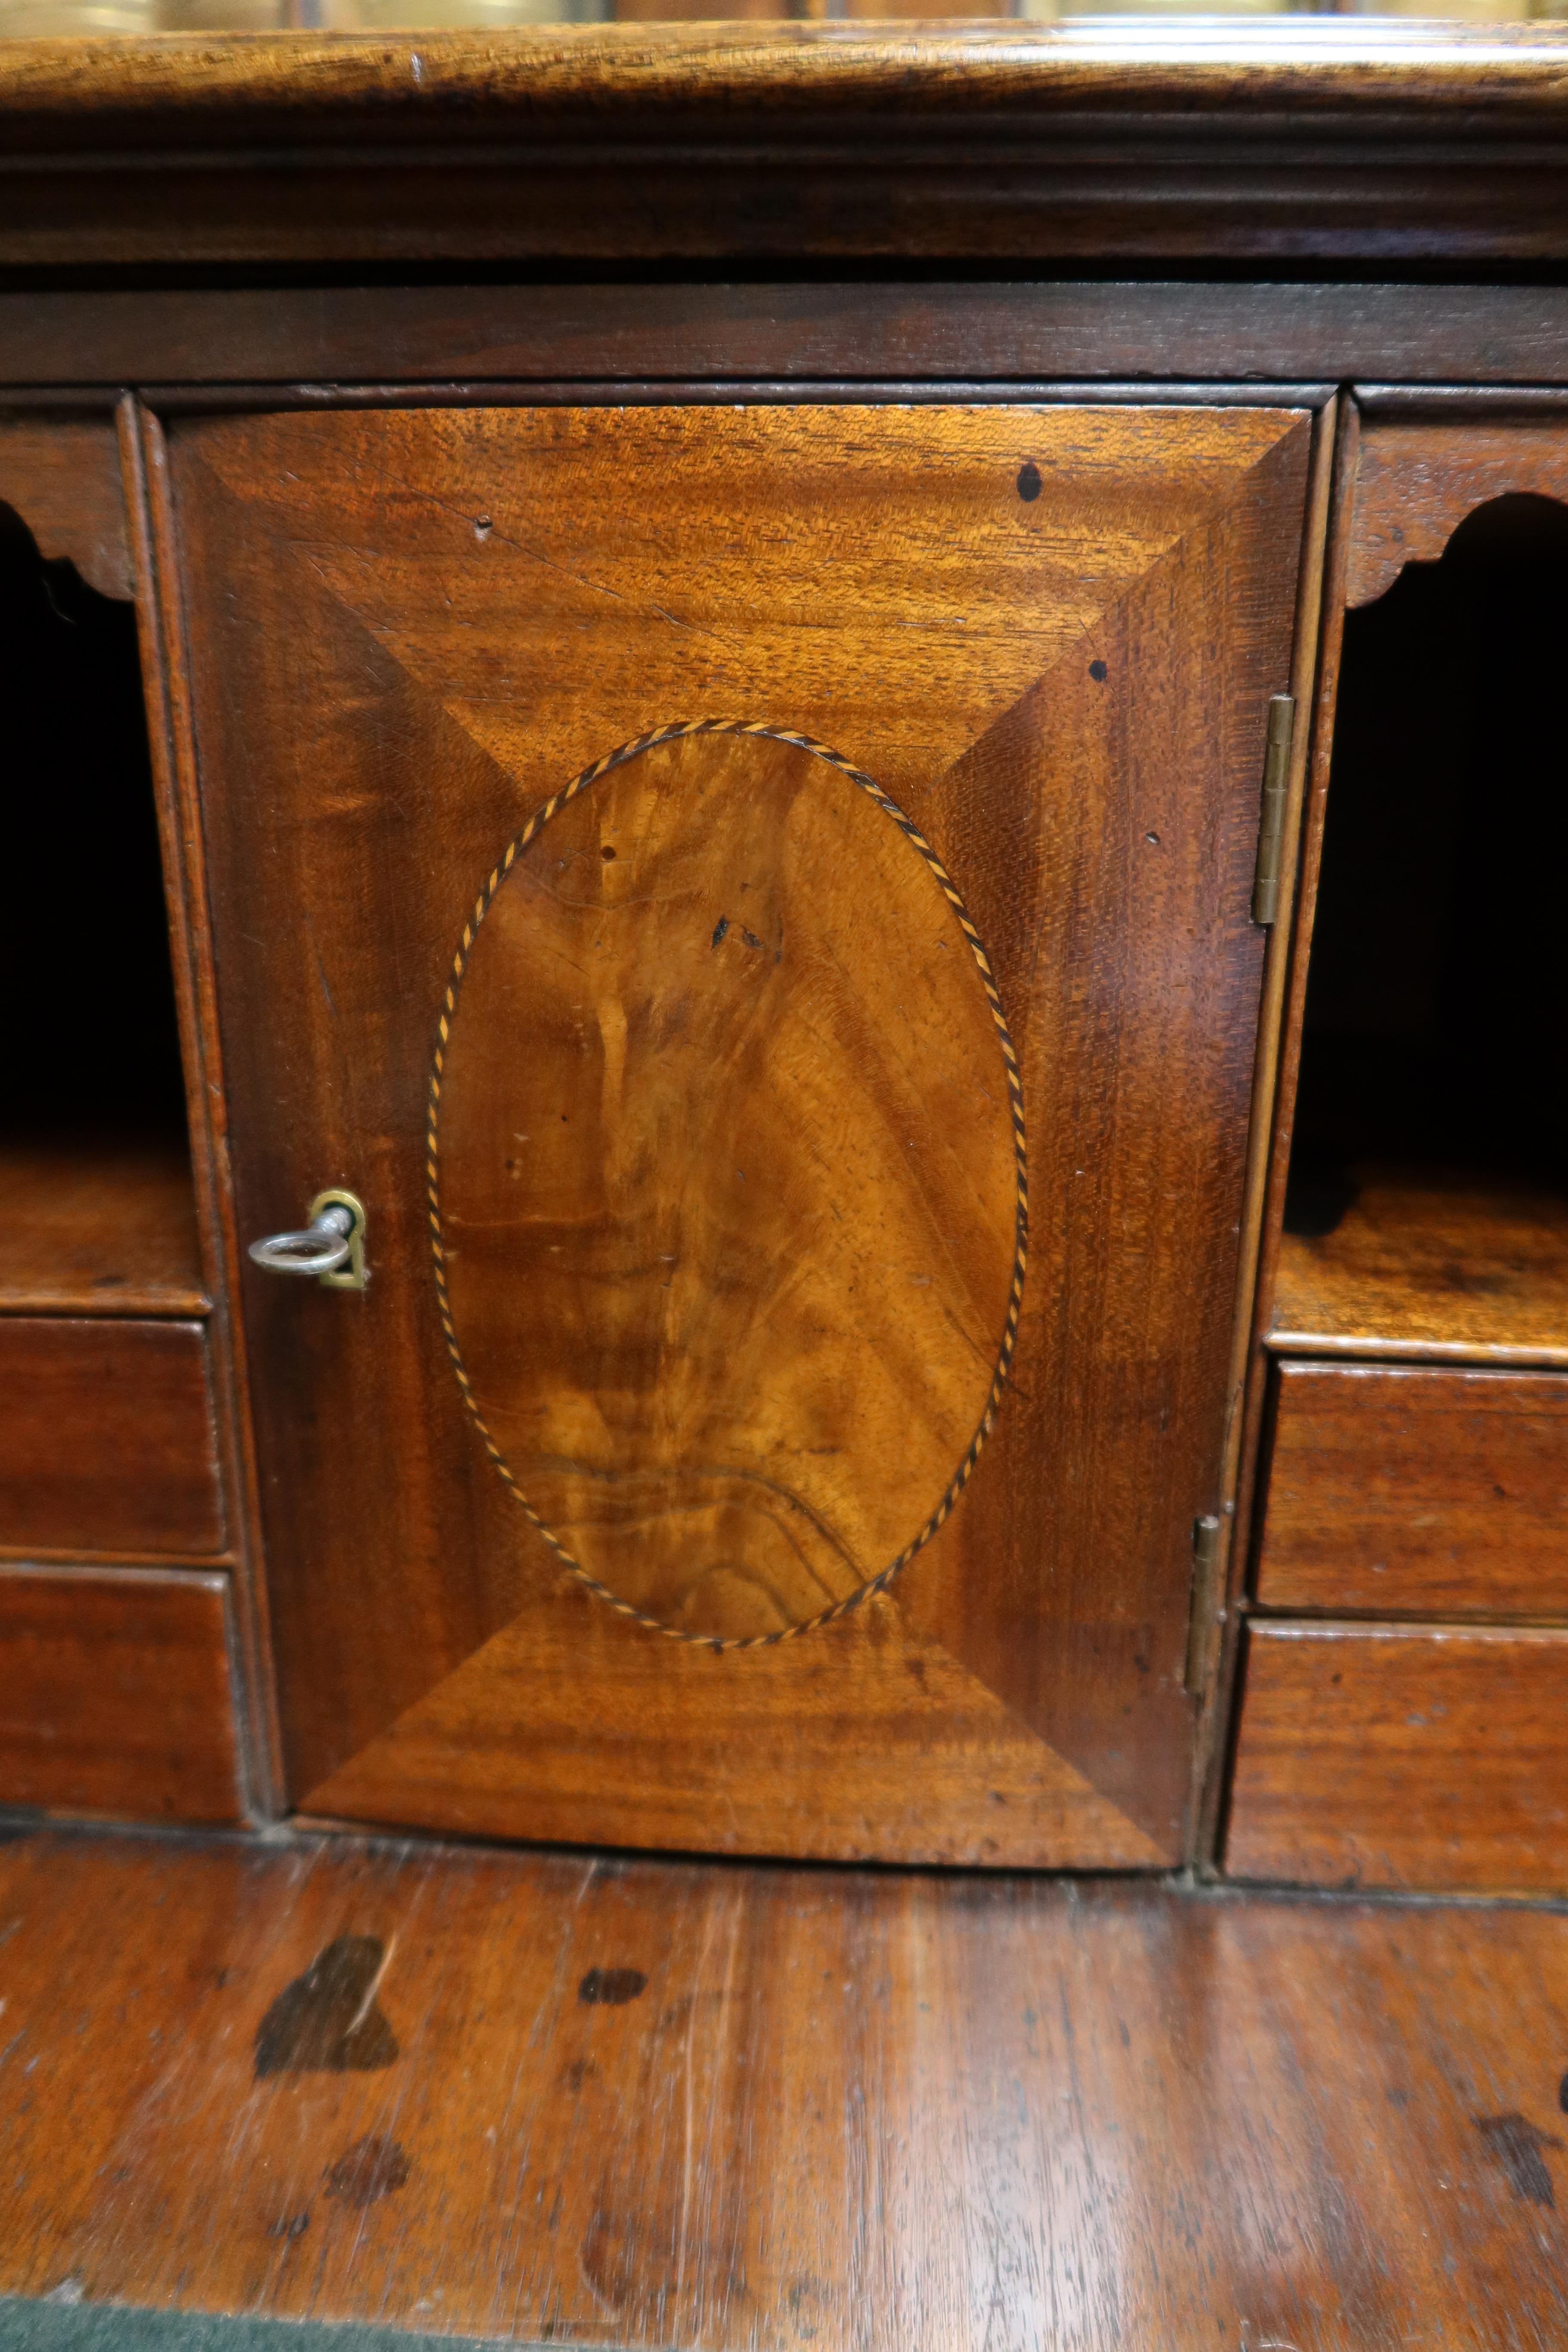 A fine antique English George III mahogany Chippendale secretaire bookcase. Superb mahogany veneers and the use of decorative stringing and crossbanding enhance the classic lines. The top drawer has its original brass swan necks handles and pulls